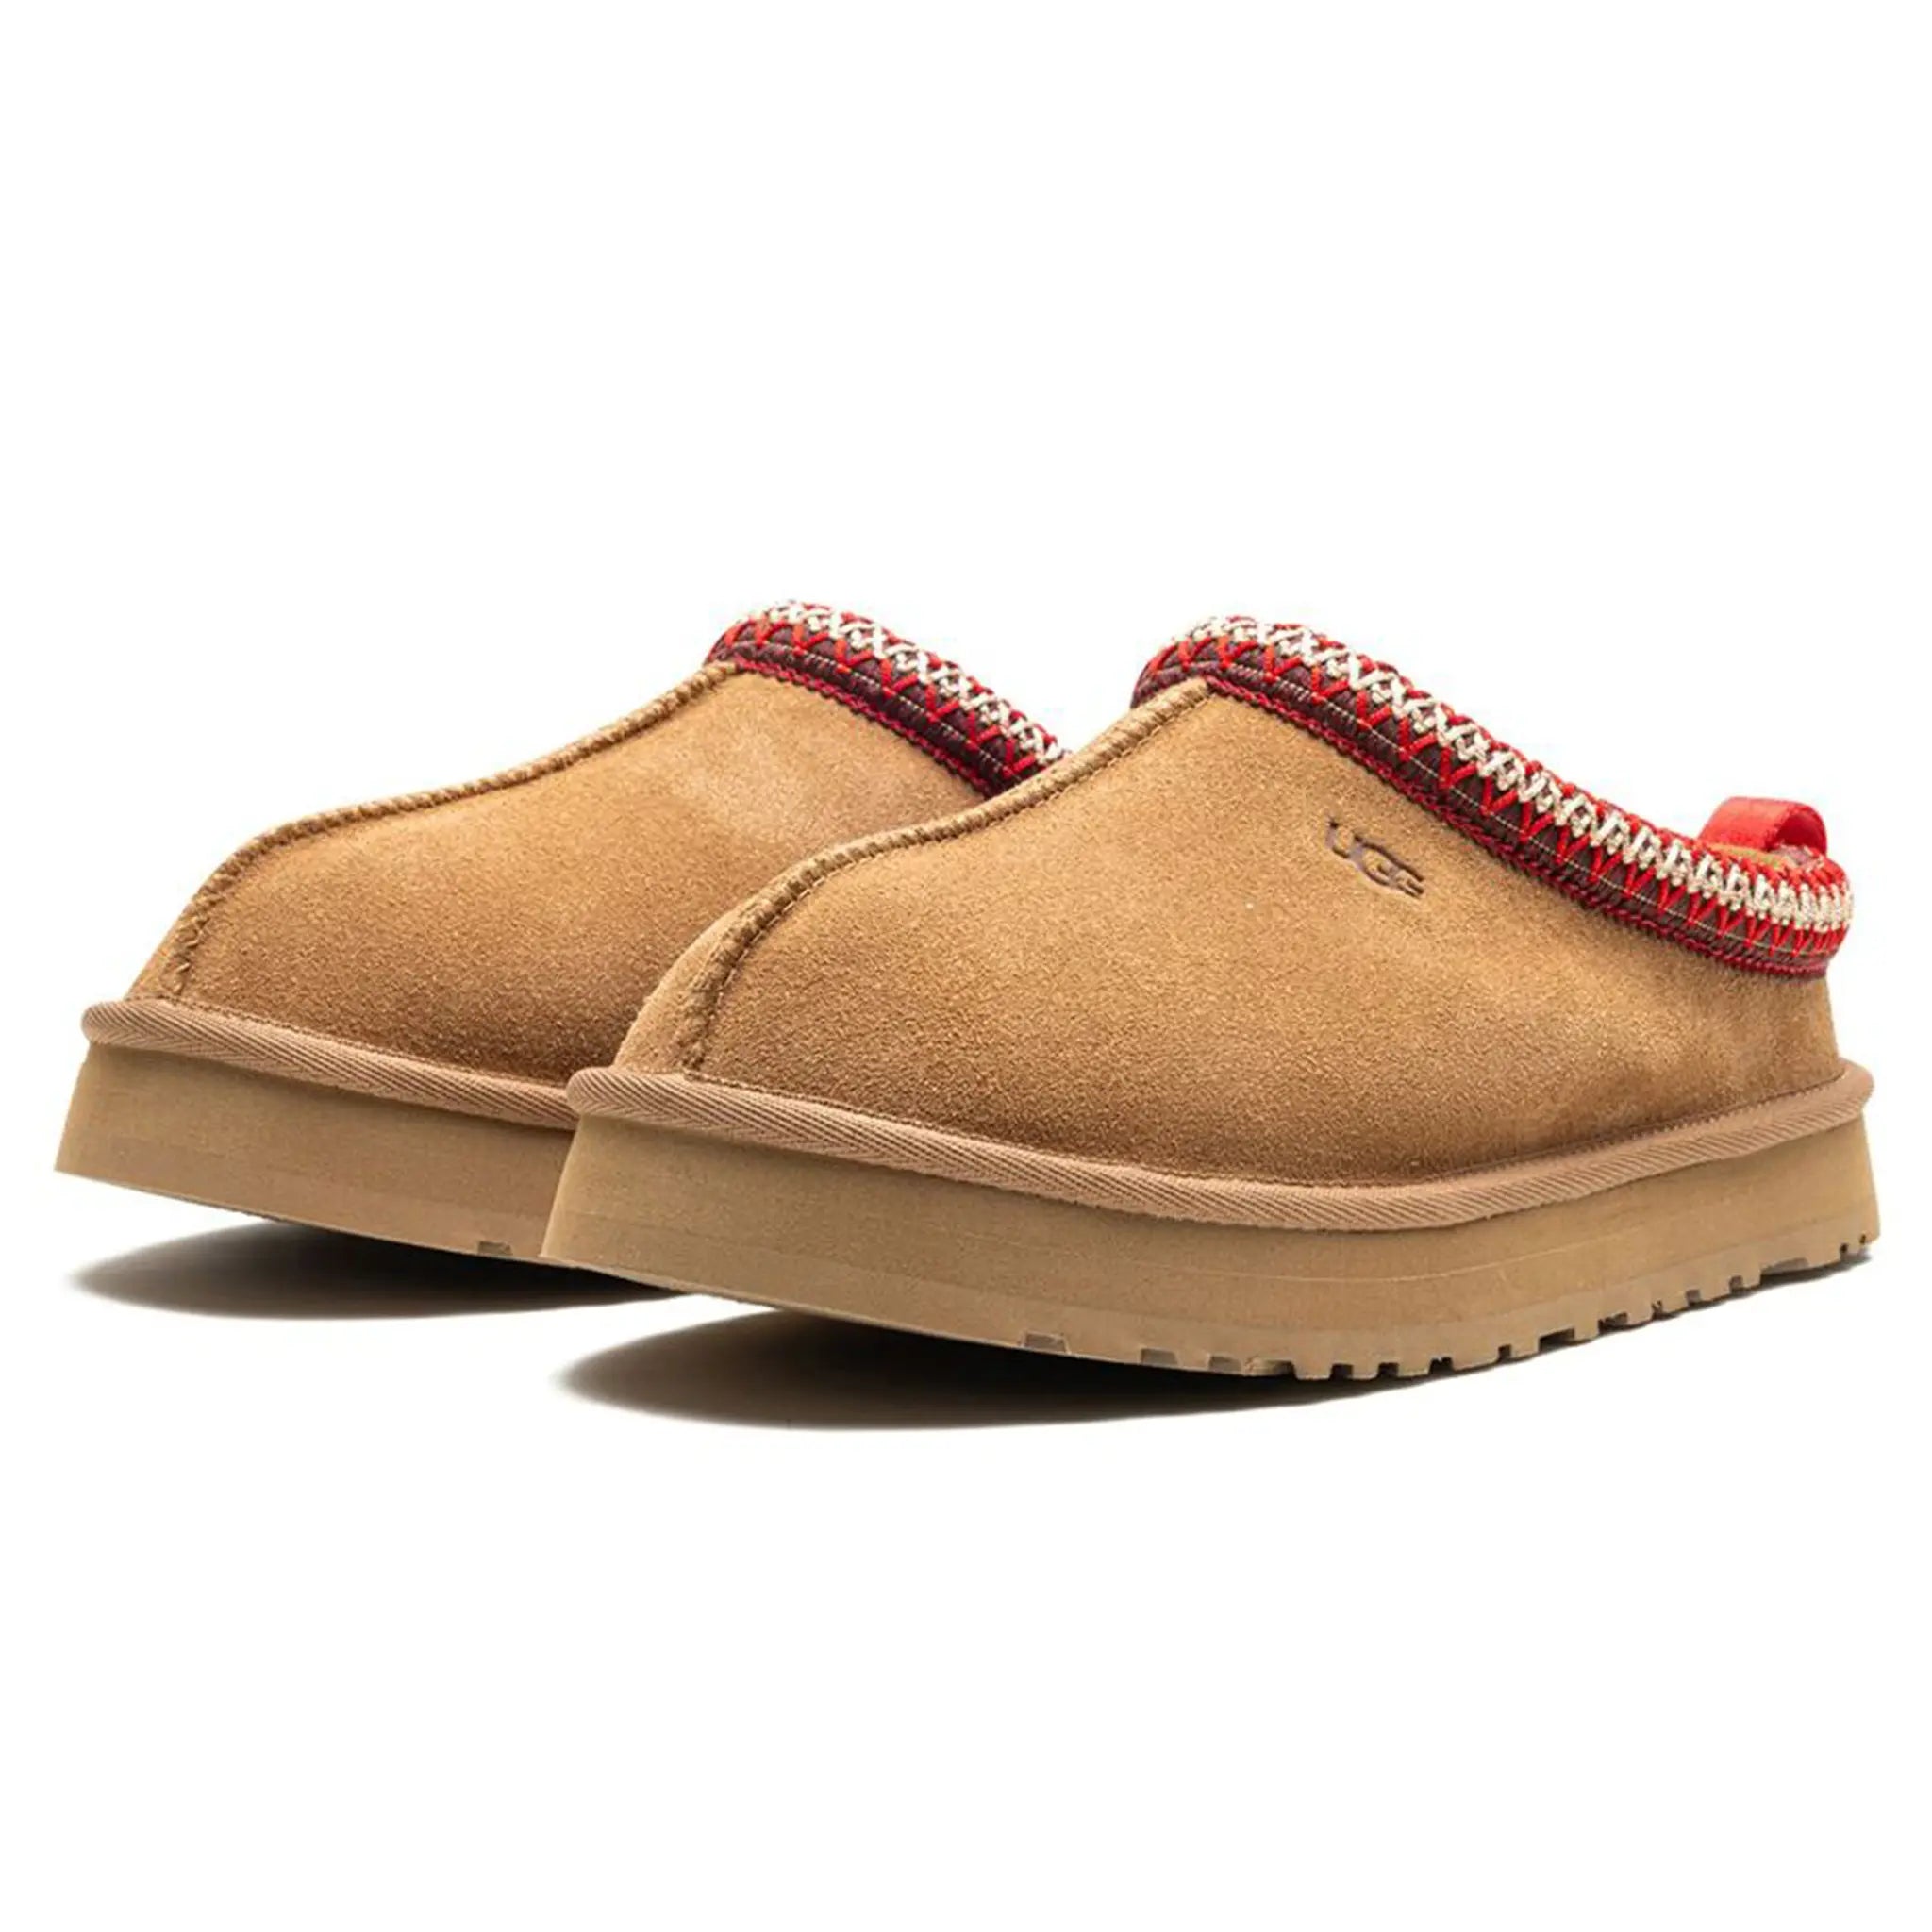 Front side view of UGG Tazz Chestnut Kids Slippers 1143776K-CHE